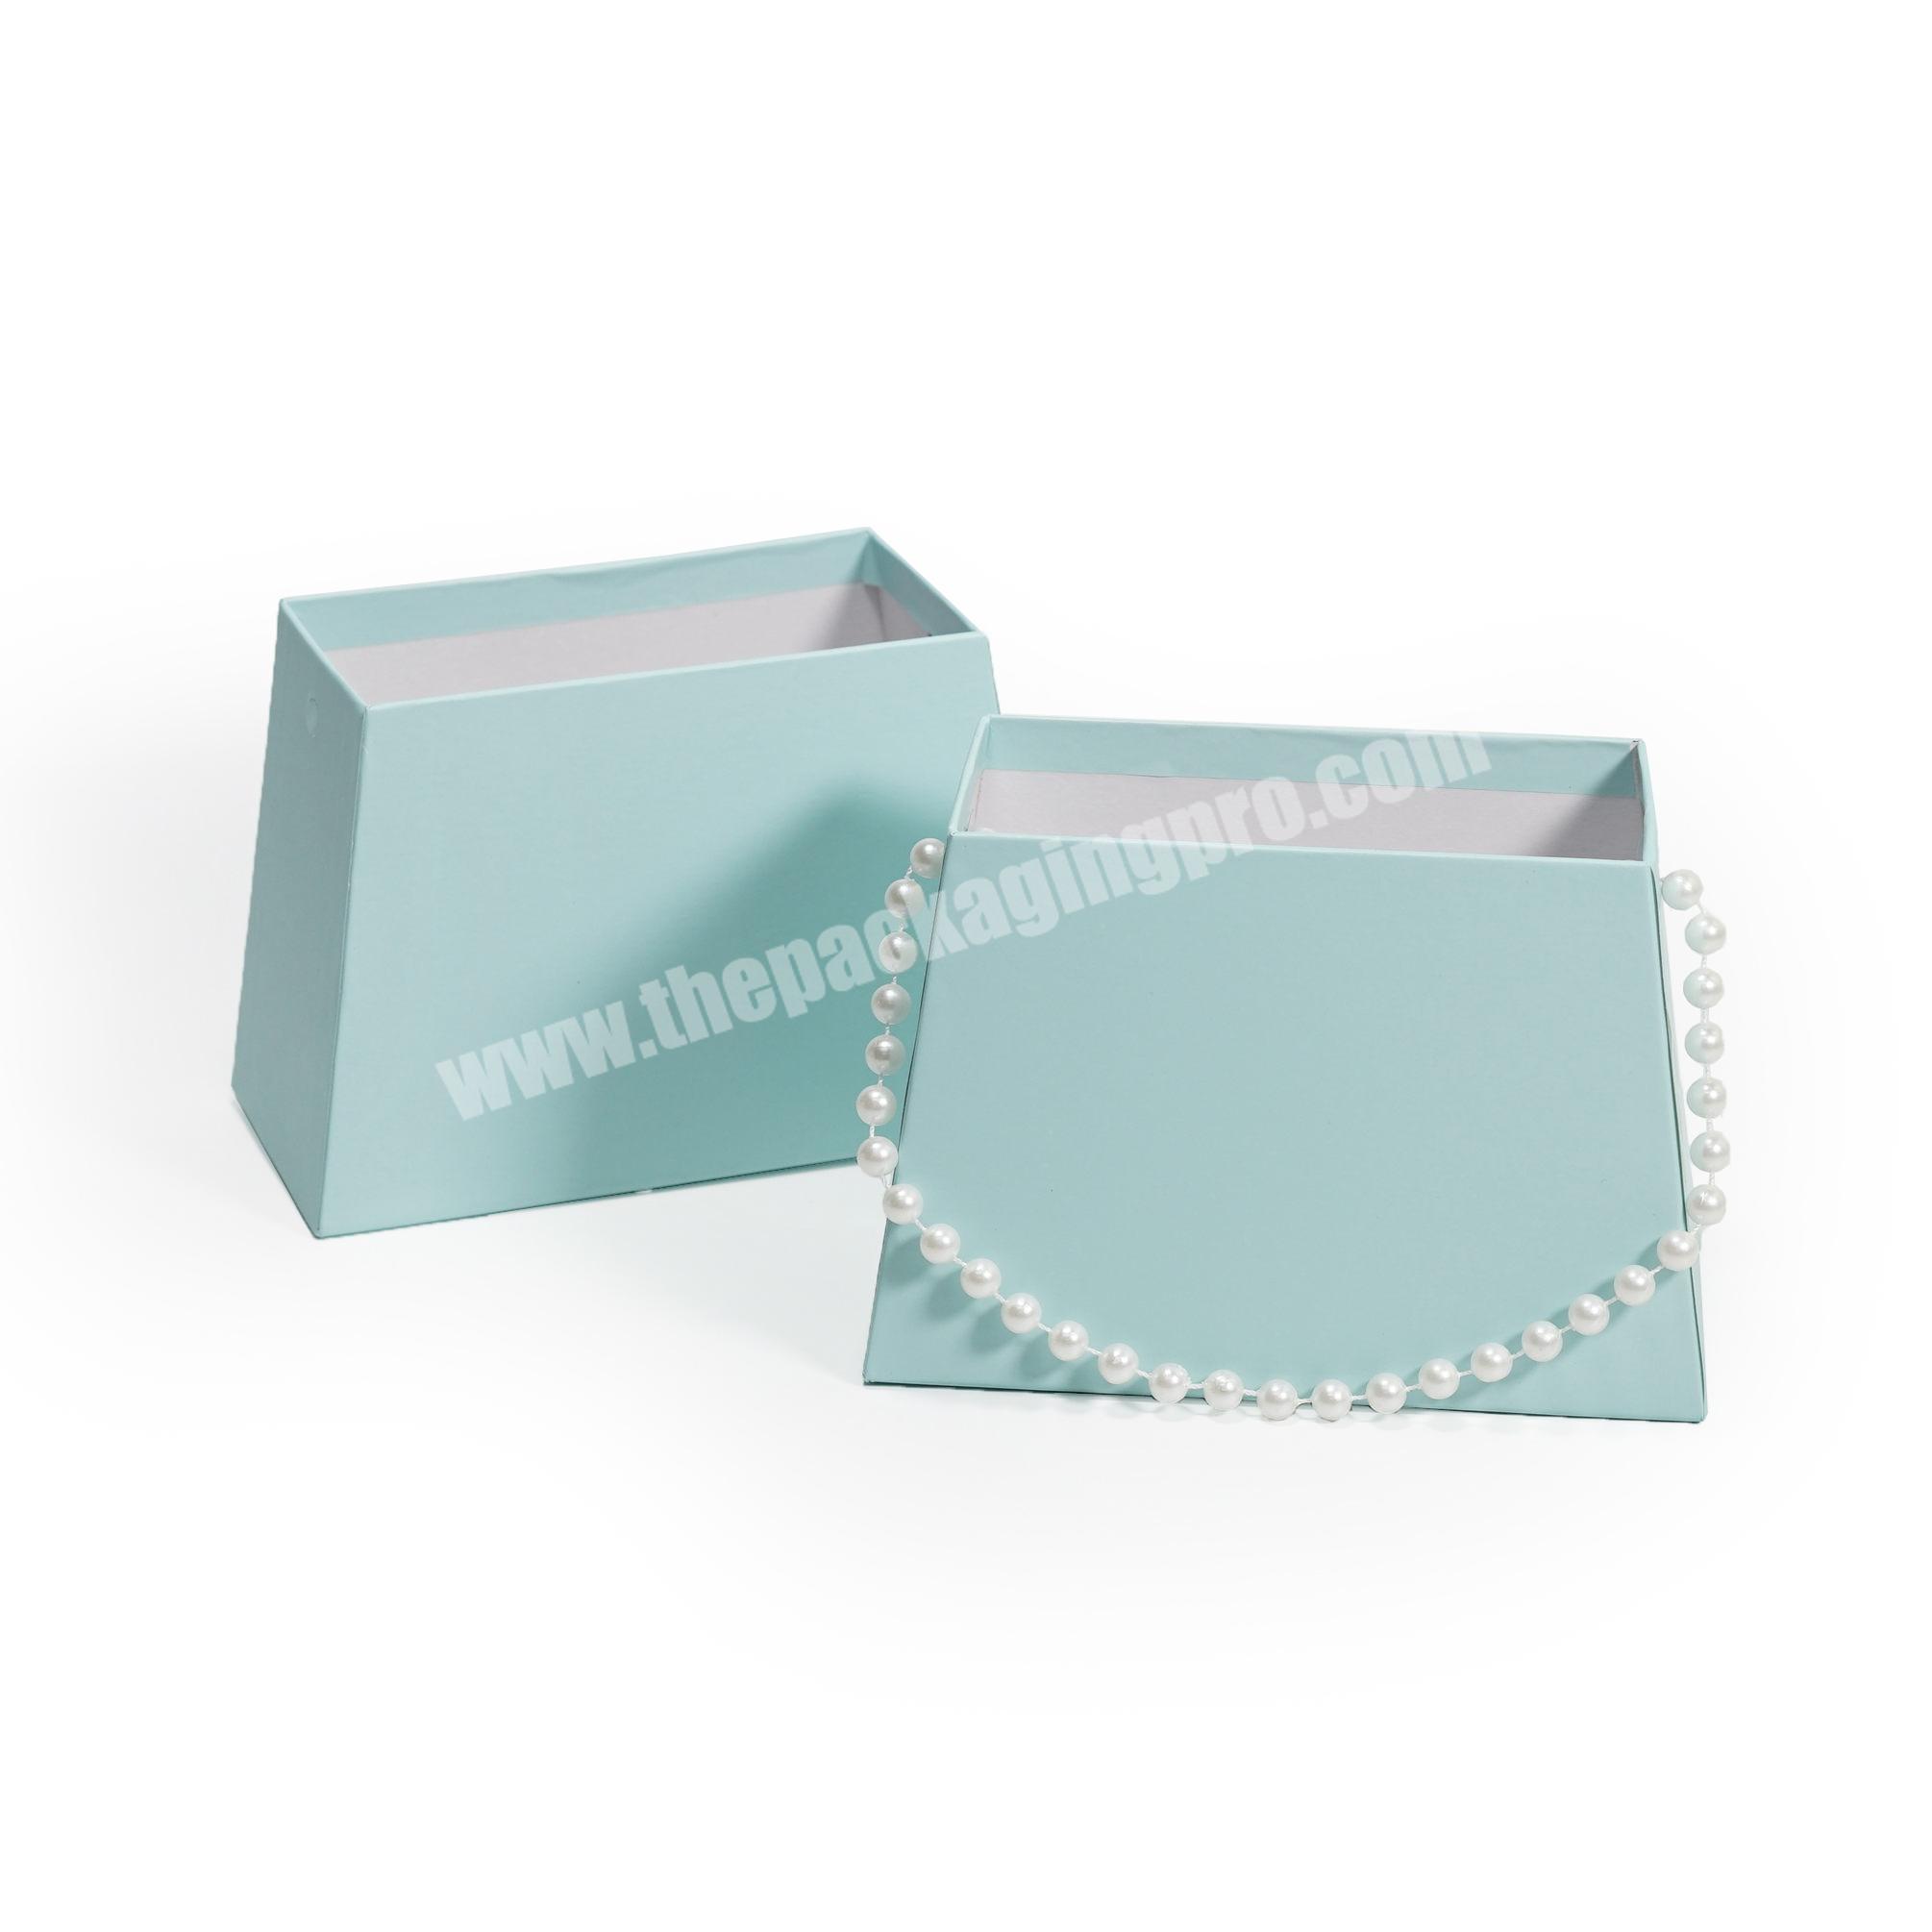 2020 New design trapezoidal flower cardboard box,gift flower bag box with pearl handle